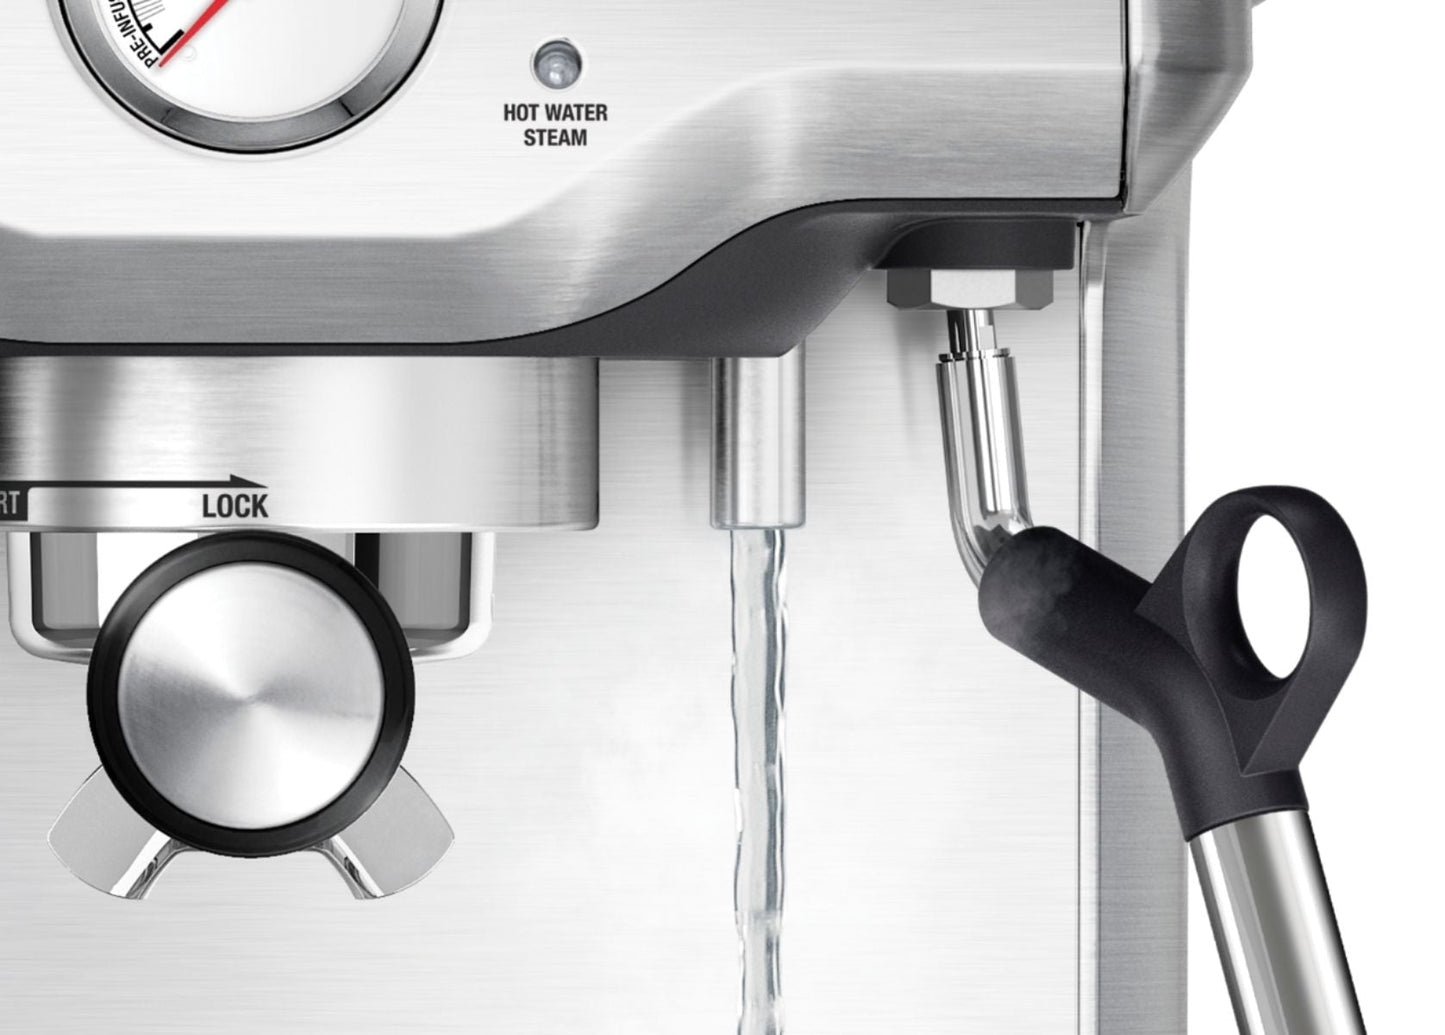 Breville - the Infuser Manual Espresso Machine with 15 bars of pressure, Milk Frother and Water filtration - Silver